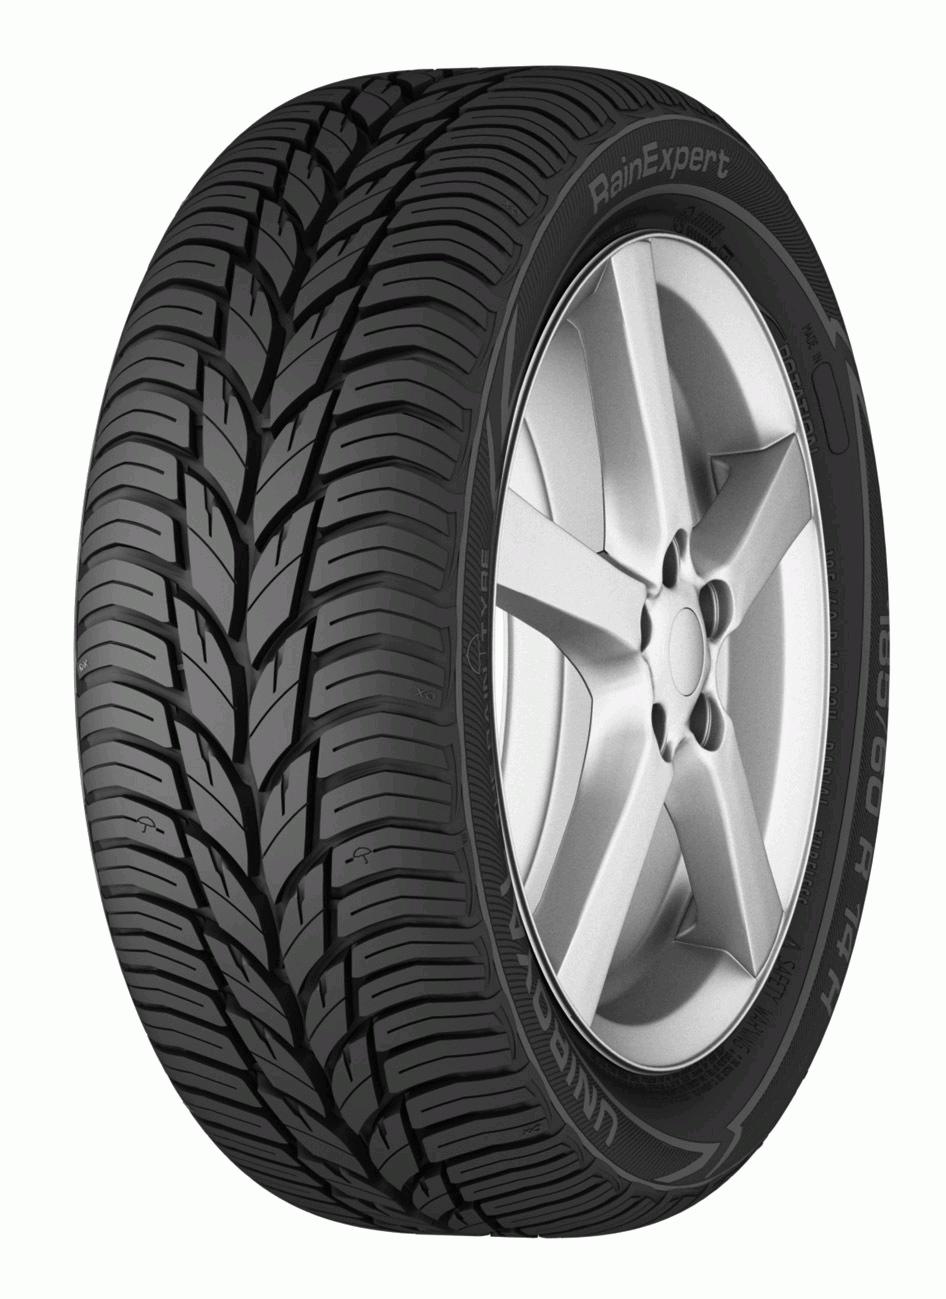 Uniroyal RainExpert - Tyre Reviews and Tests